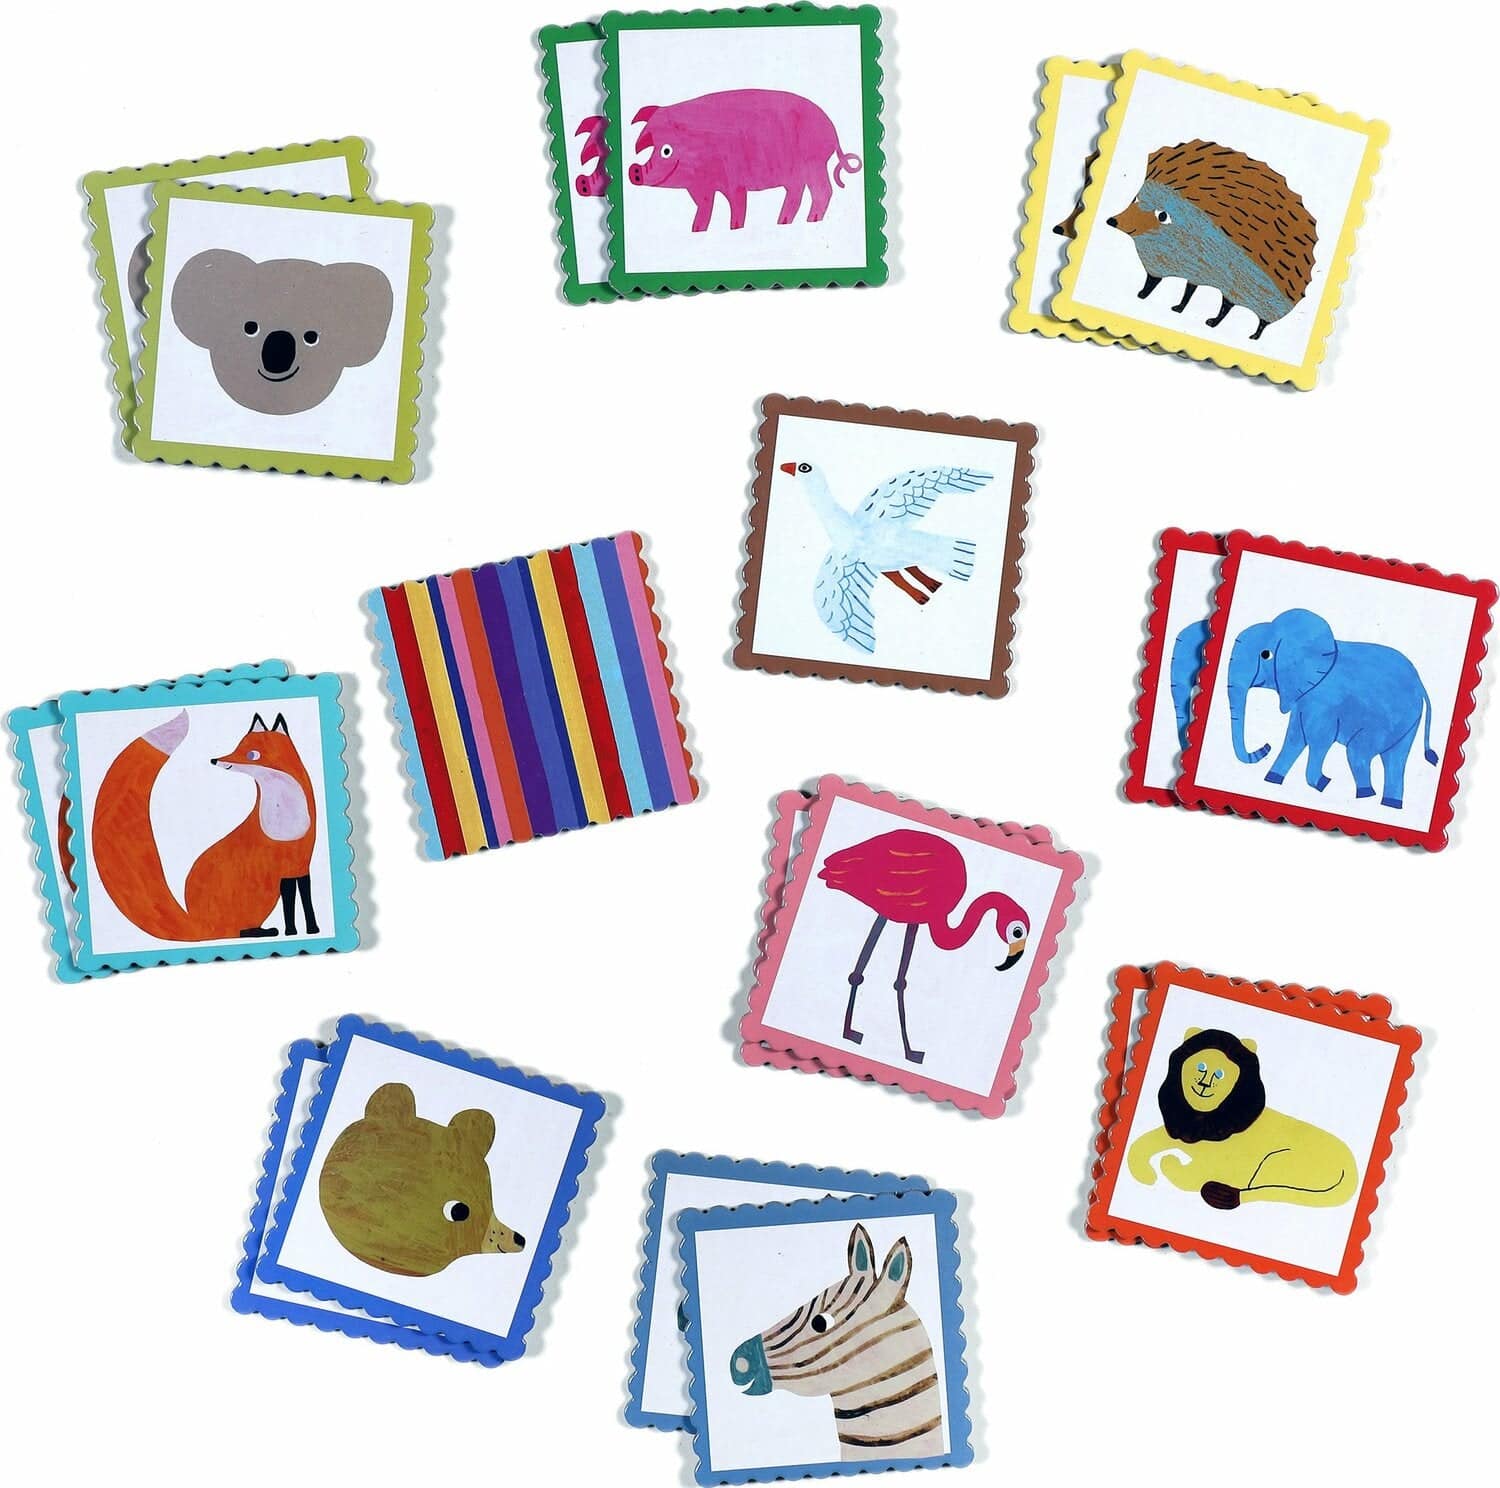 Animal Memory Matching Game - A Child's Delight